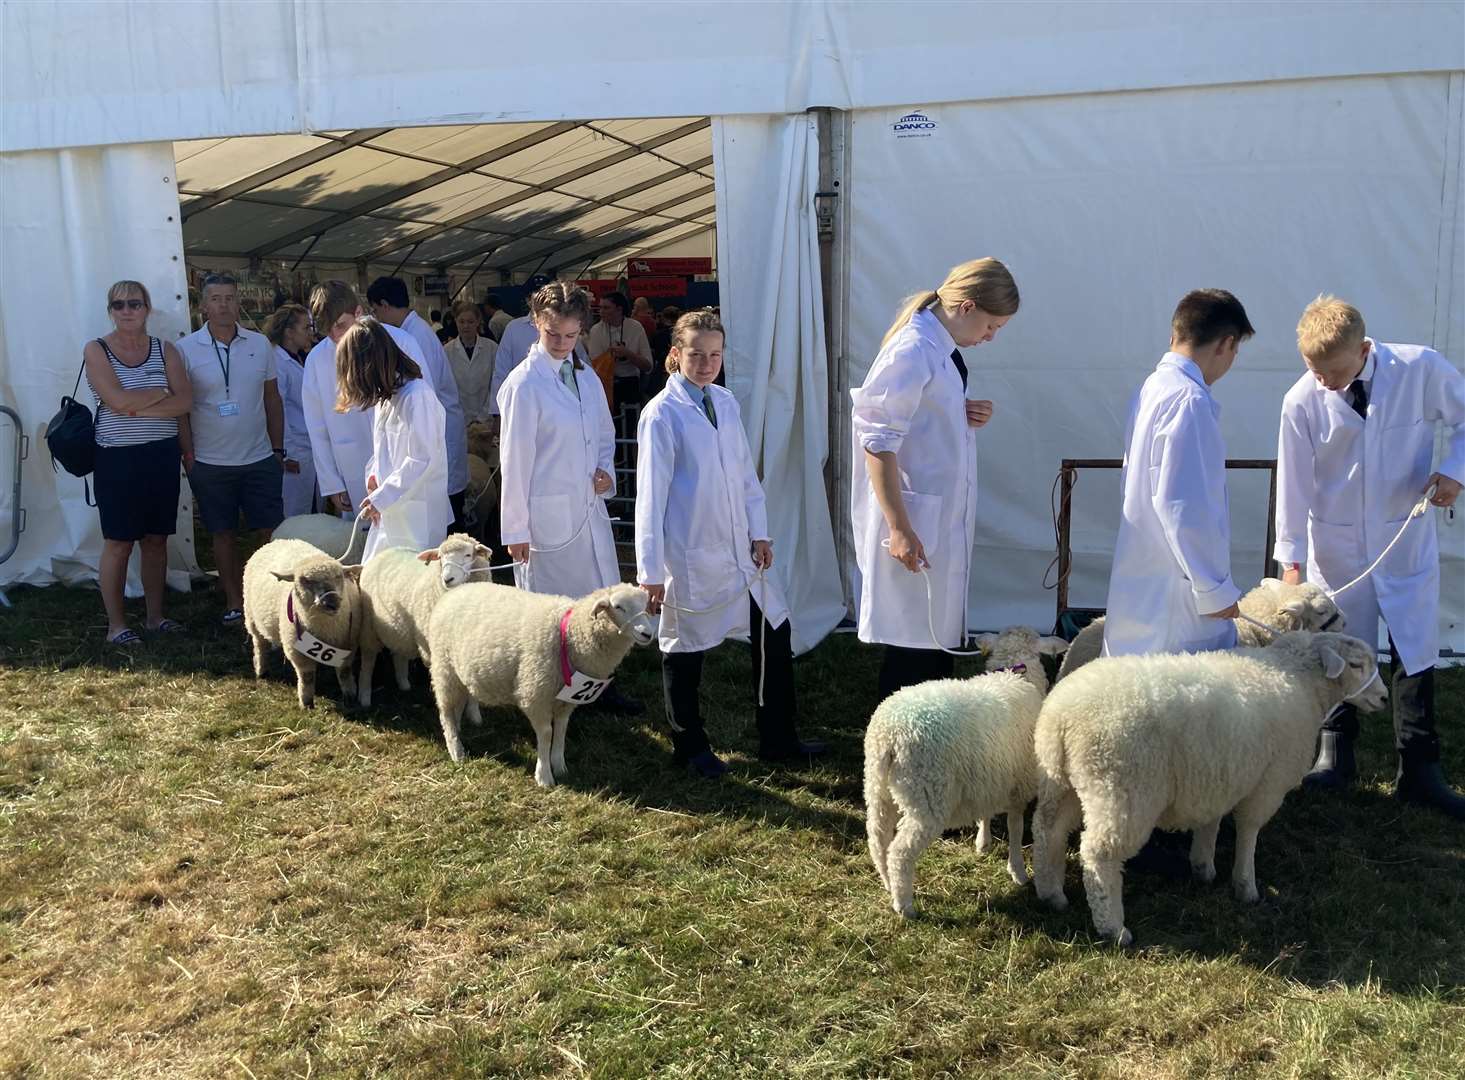 Lambs being led to the show ring